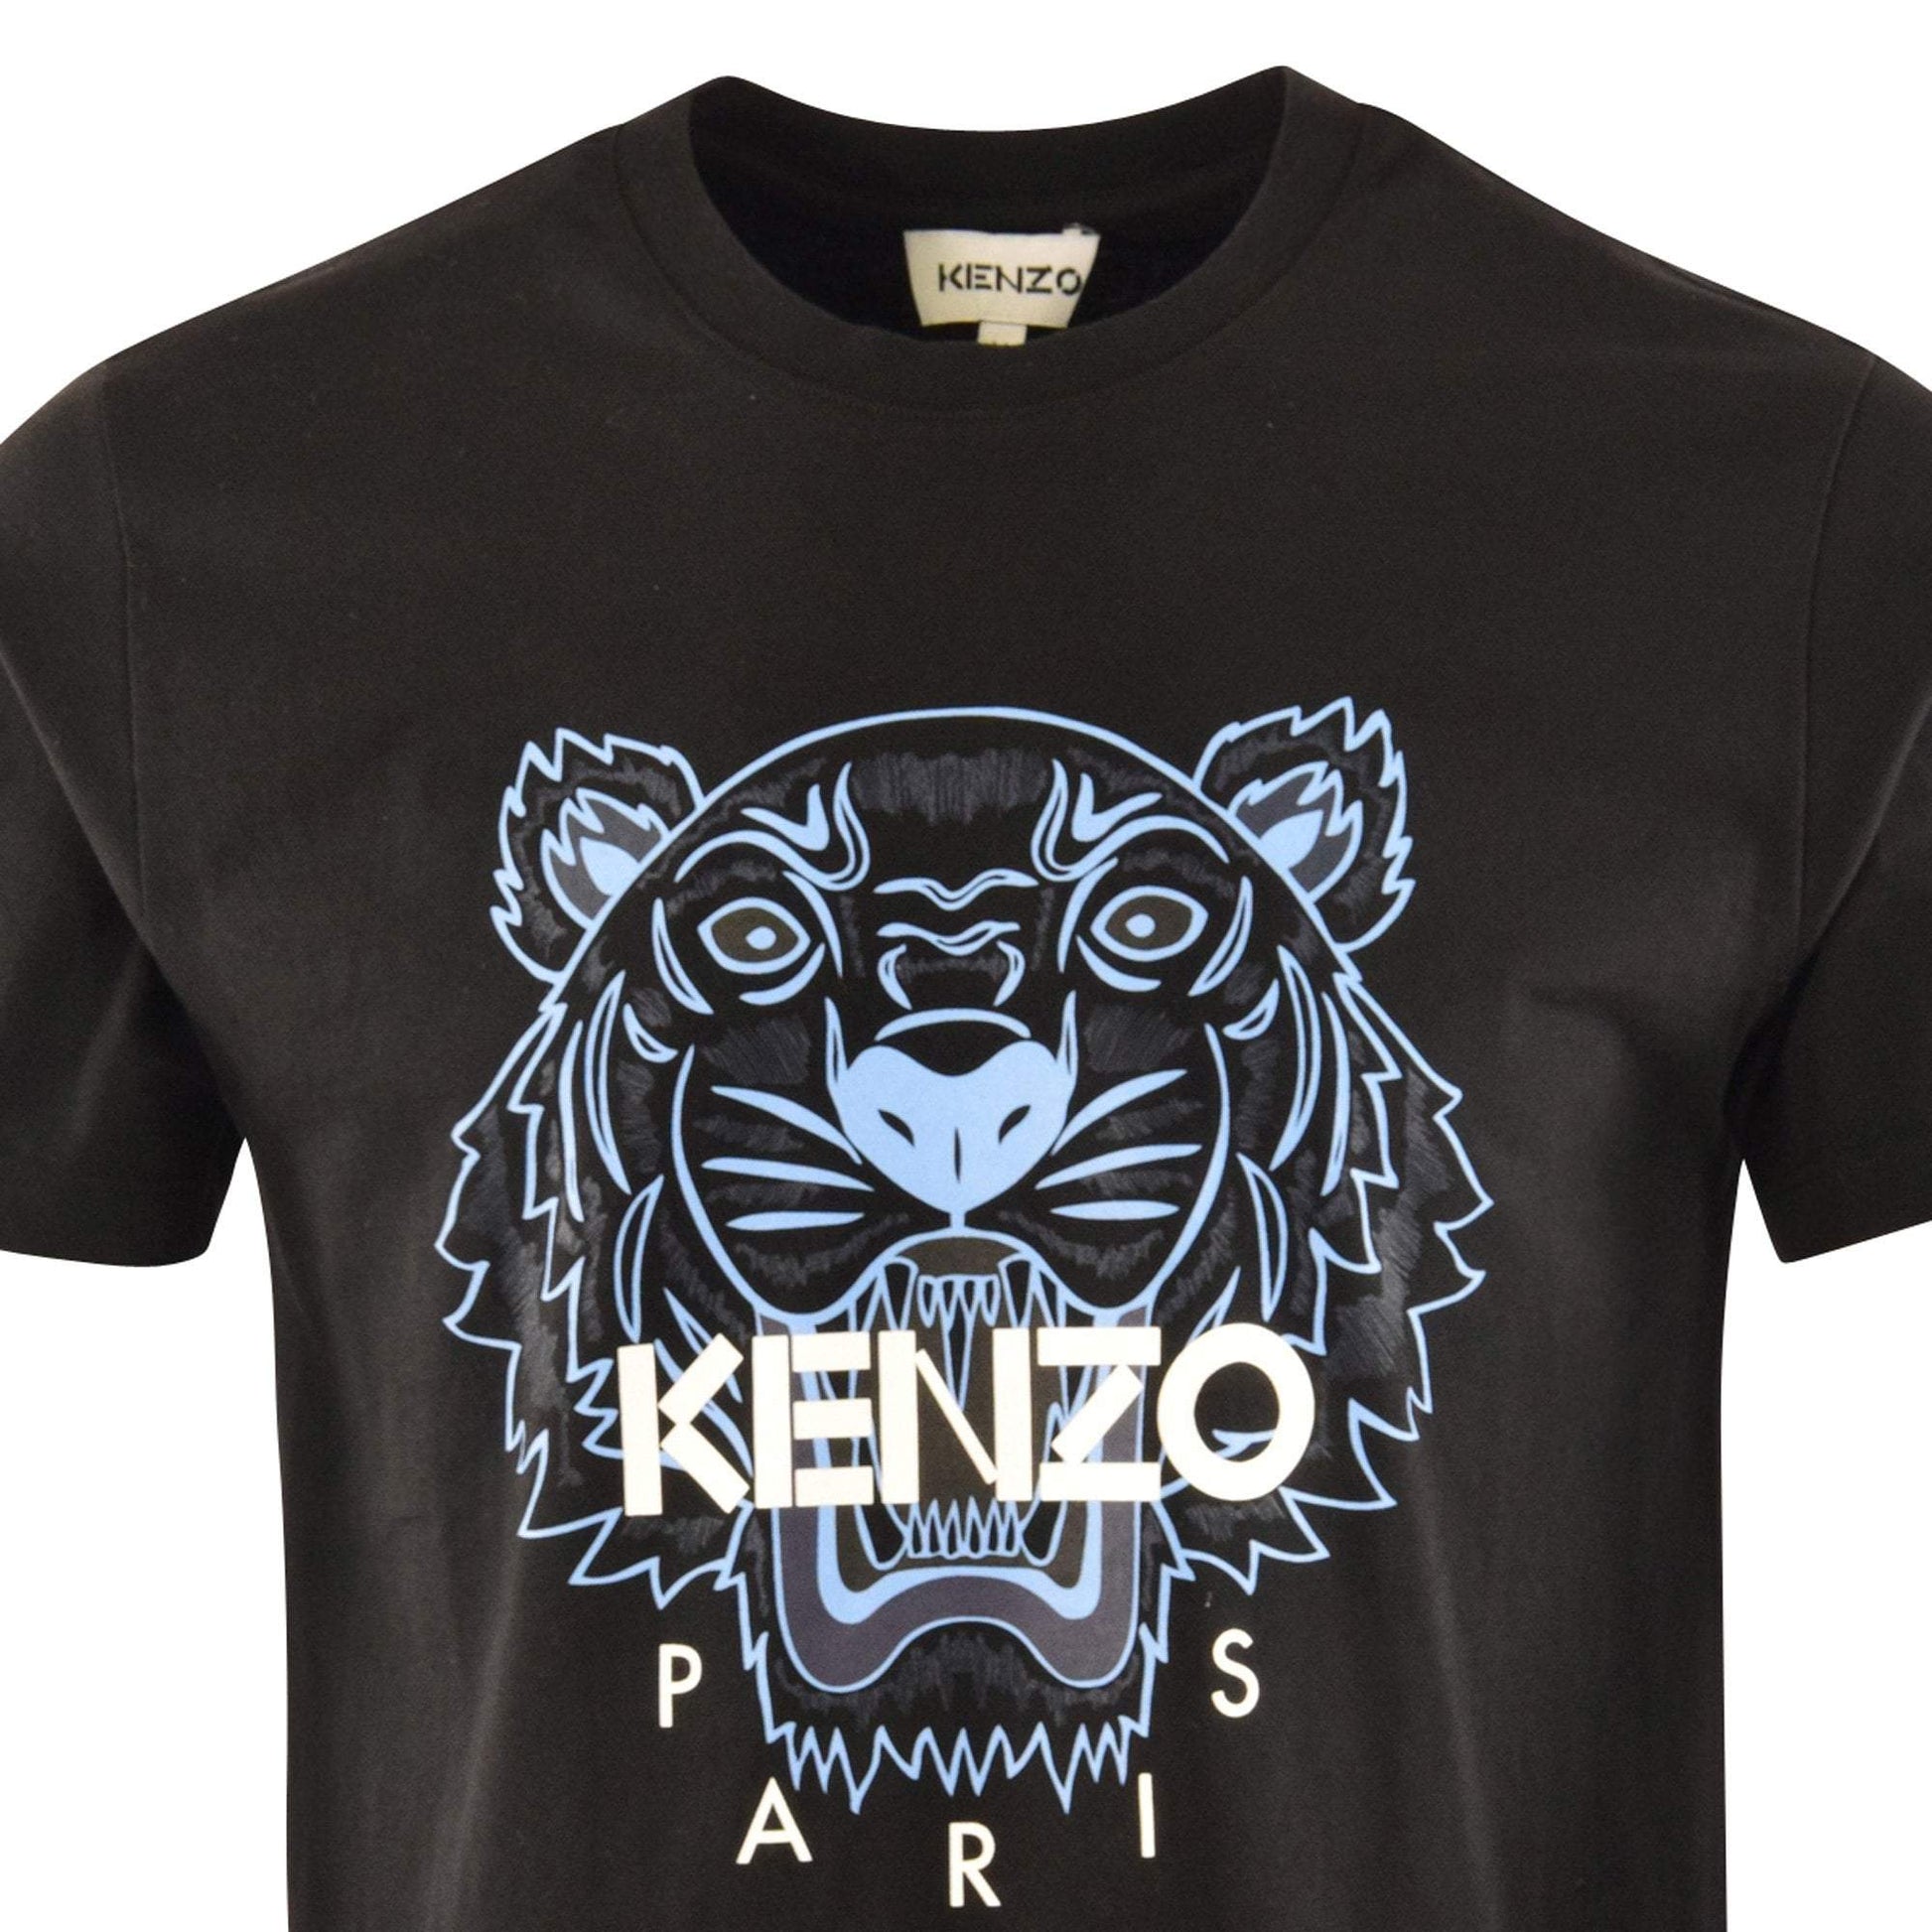 Kenzo Black & Blue Tiger Head Motif T-Shirt ( New Design ) - Shop Streetwear, Sneakers, Slippers and Gifts online | Malaysia - The Factory KL